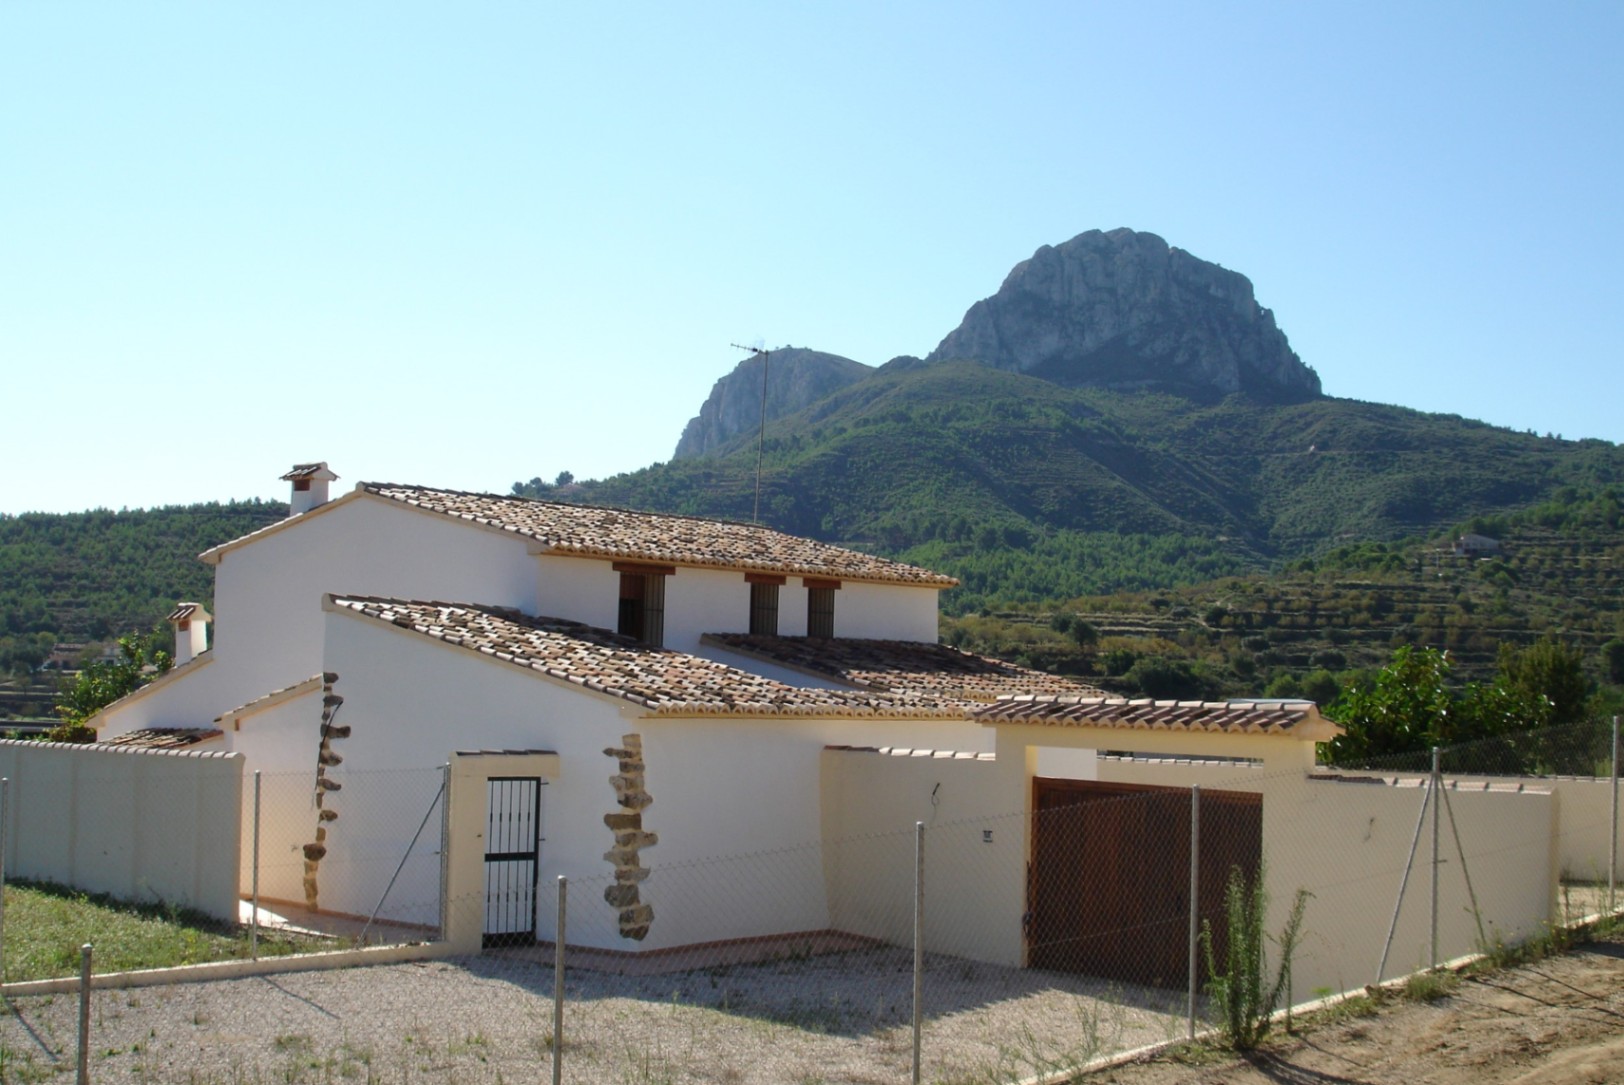 Rustic finca in the countryside of Benissa